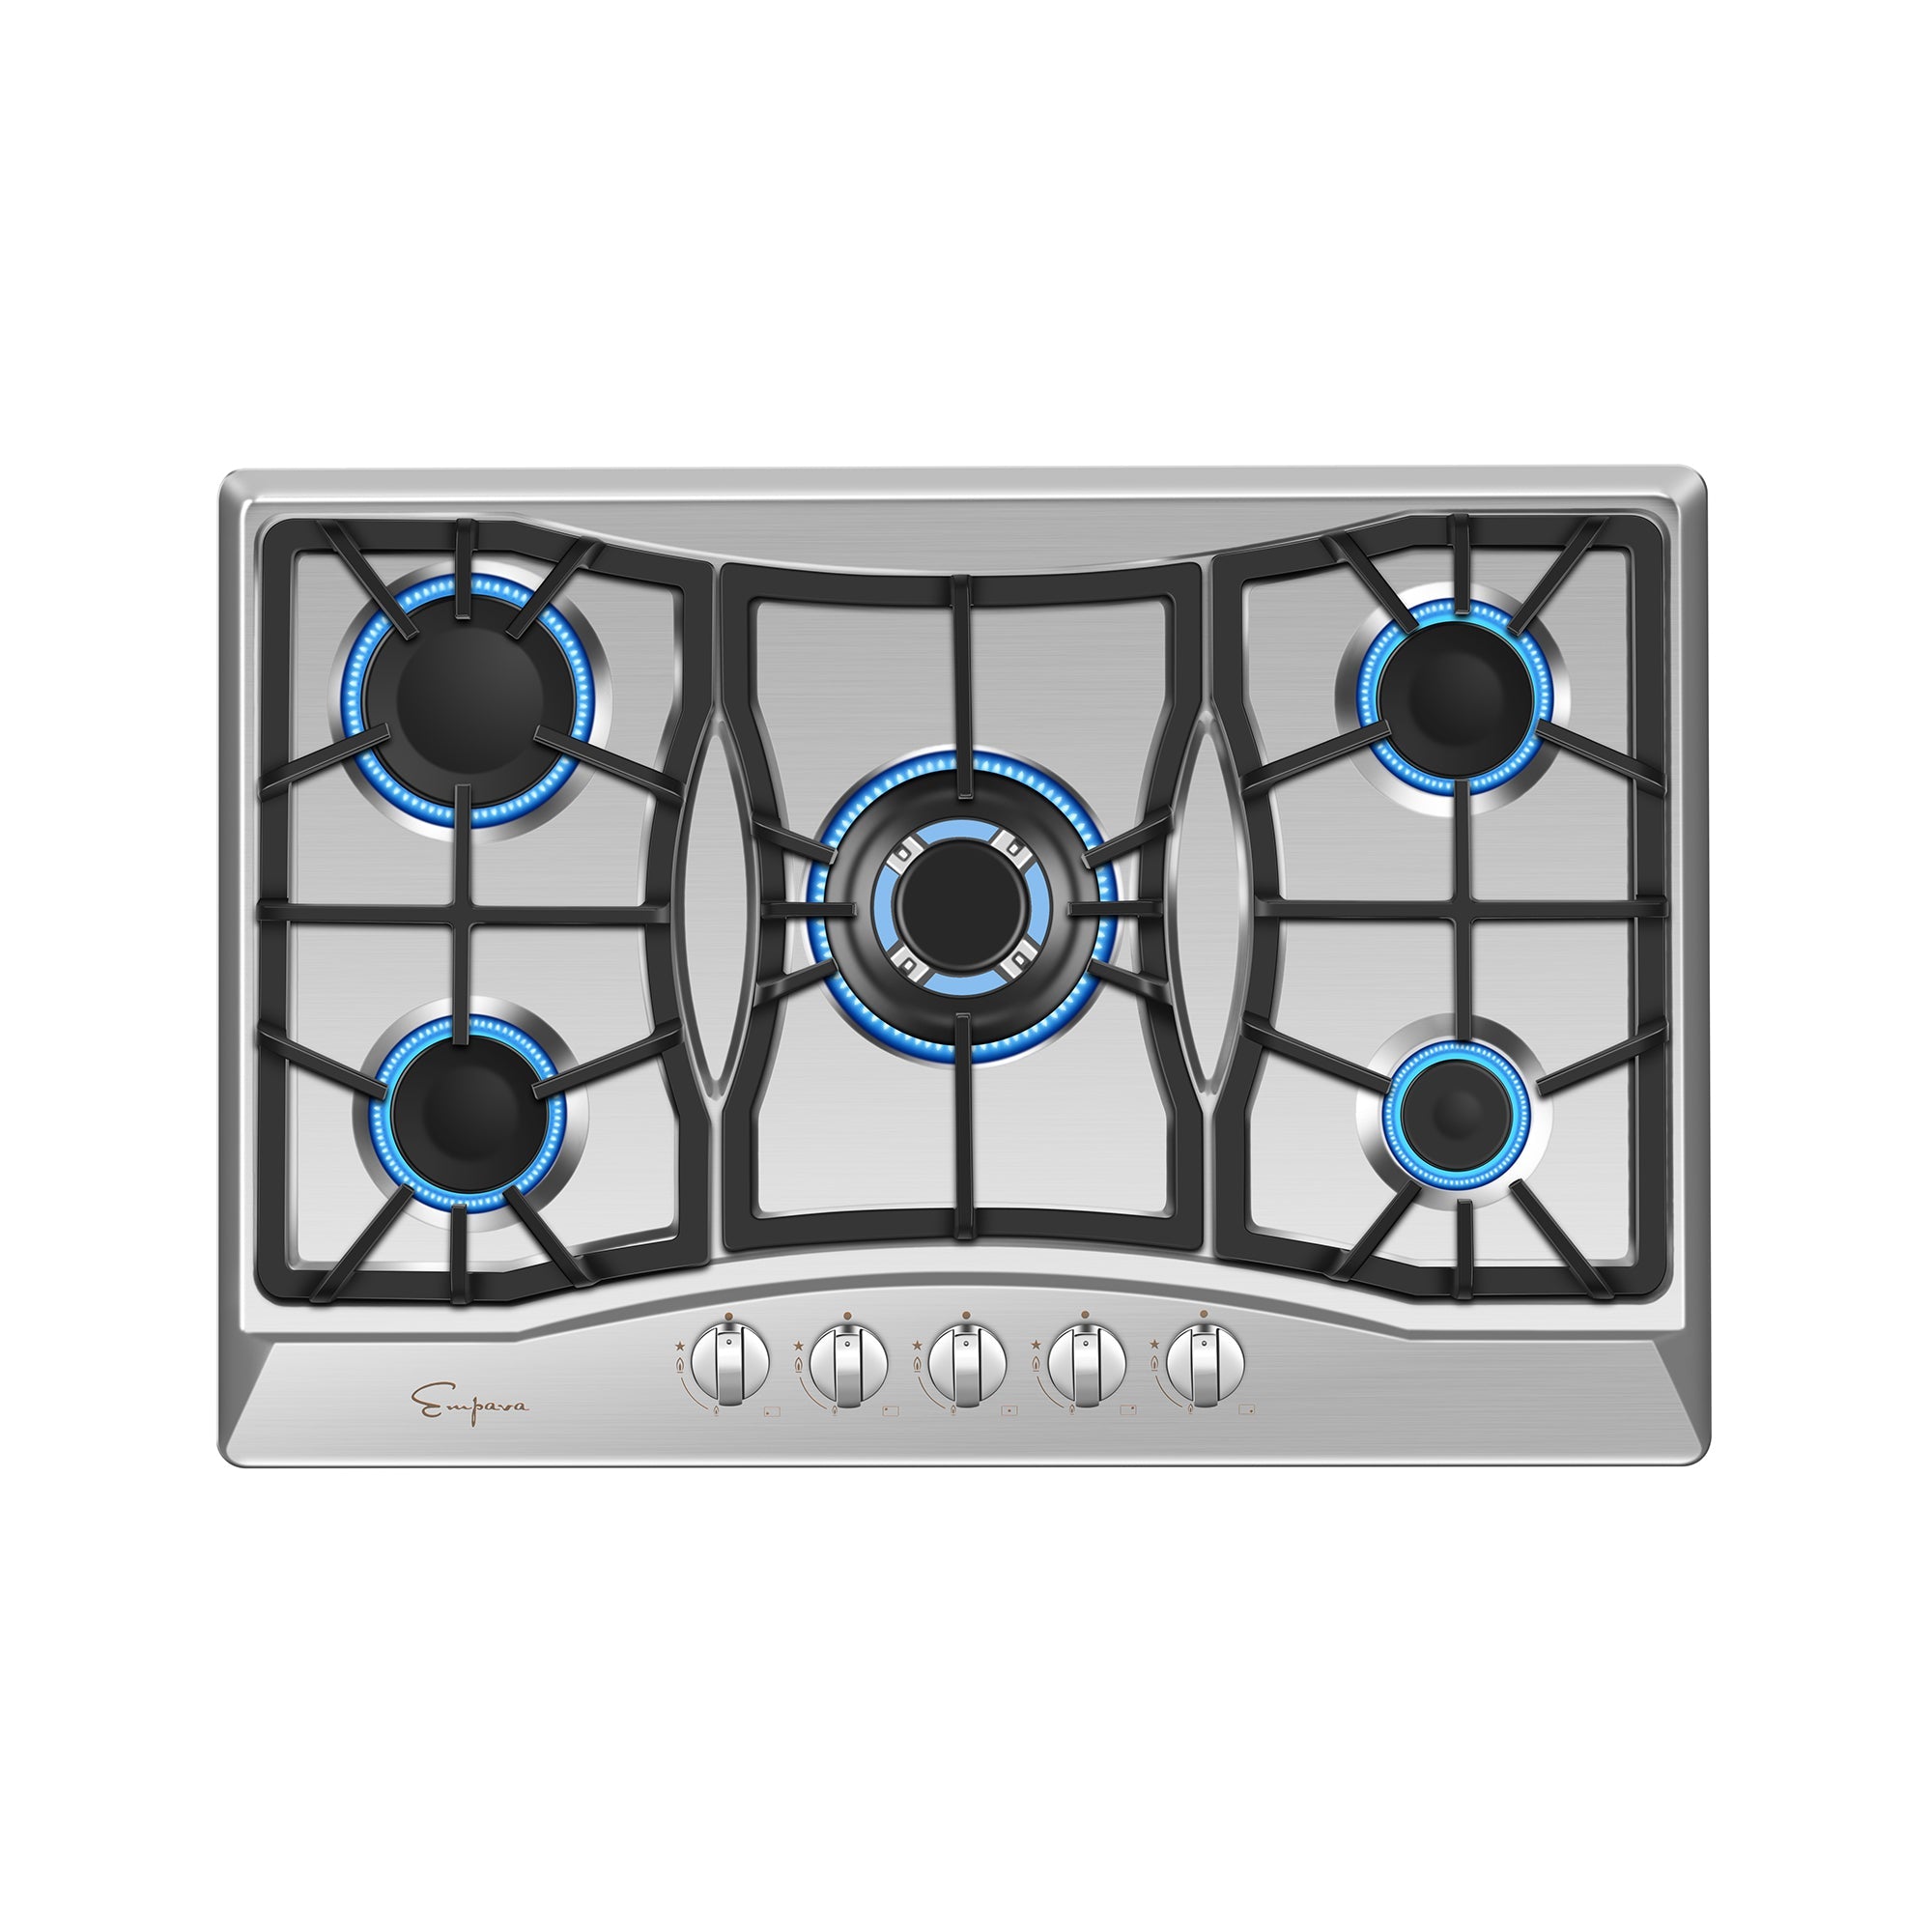 Empava 30GC21 30 in. Built-in Gas Stove Cooktop